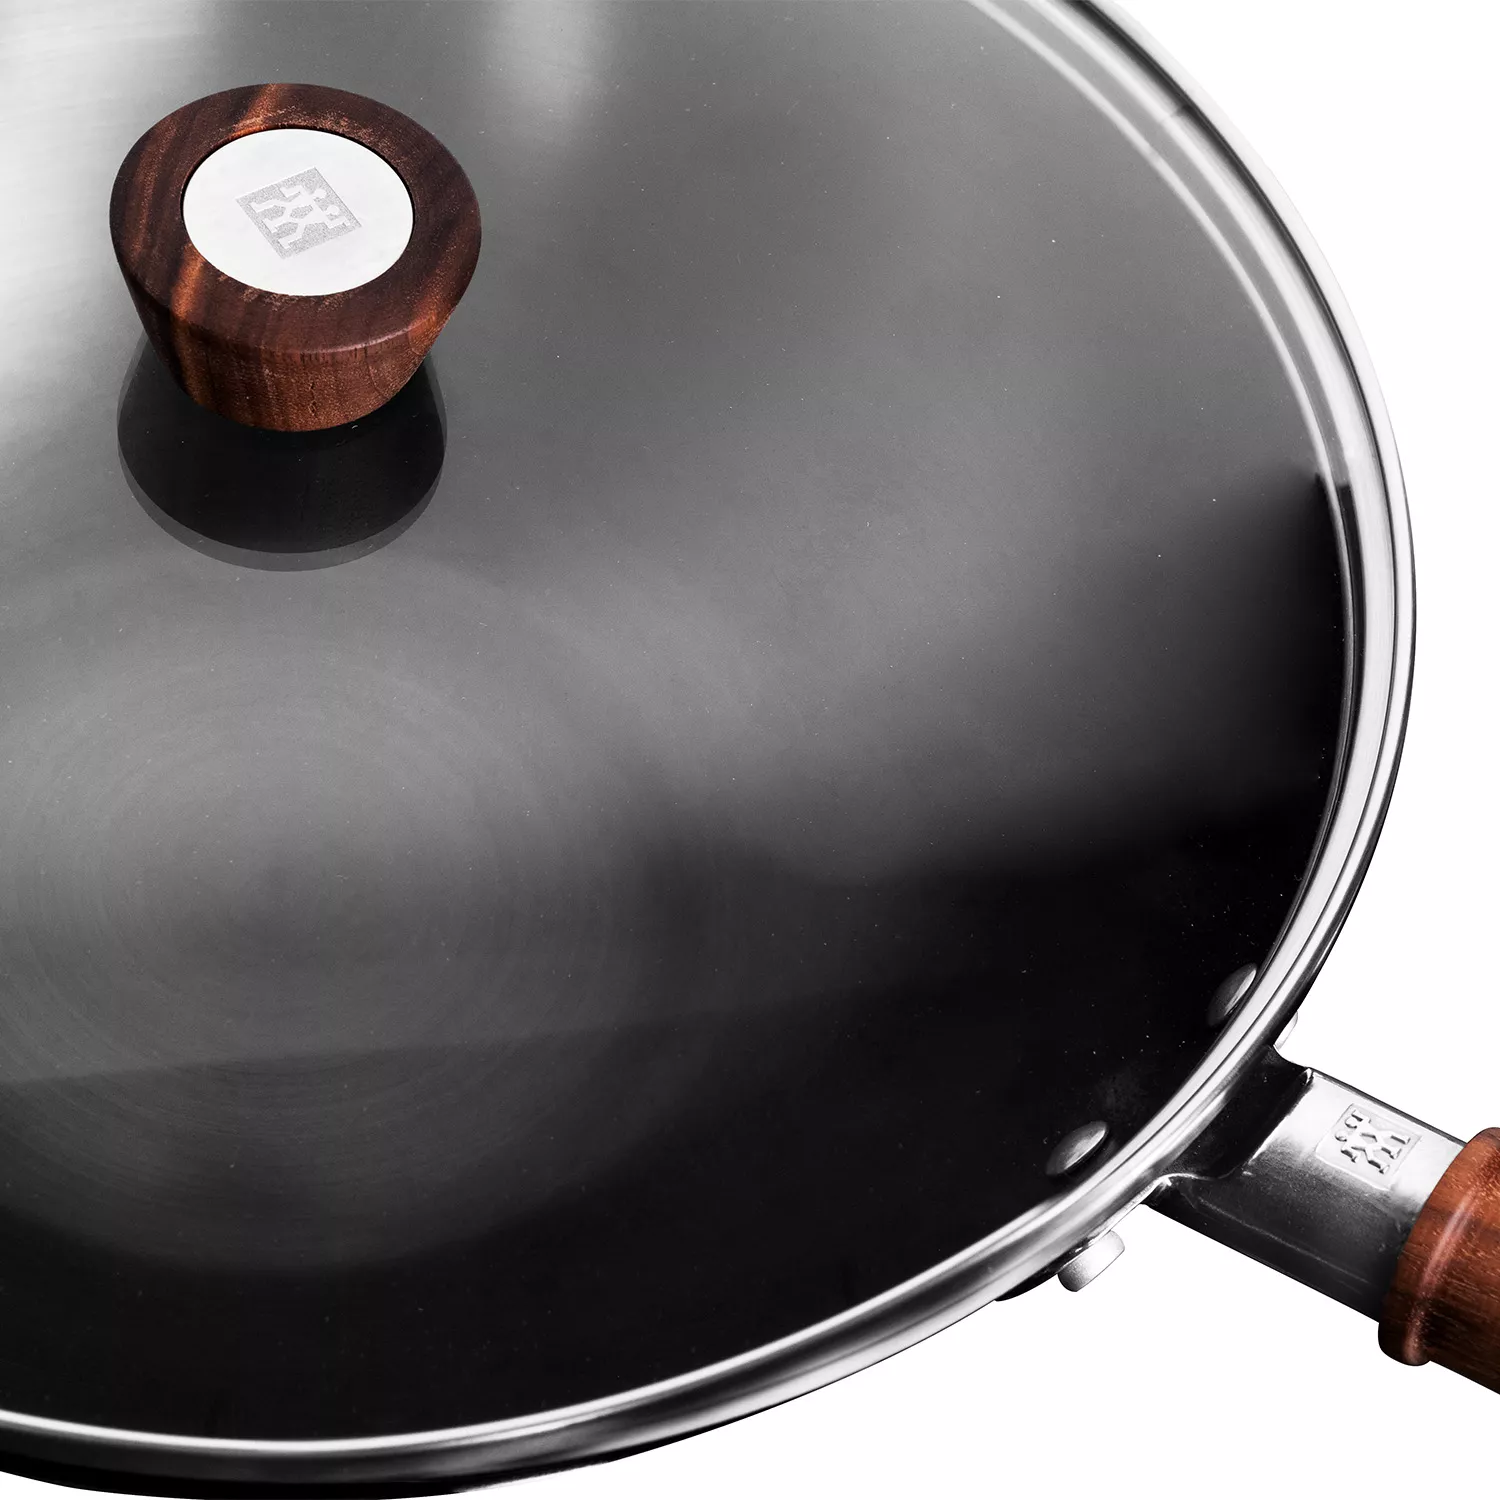 ZWILLING Dragon 12-inch Carbon Steel Wok with Lid 